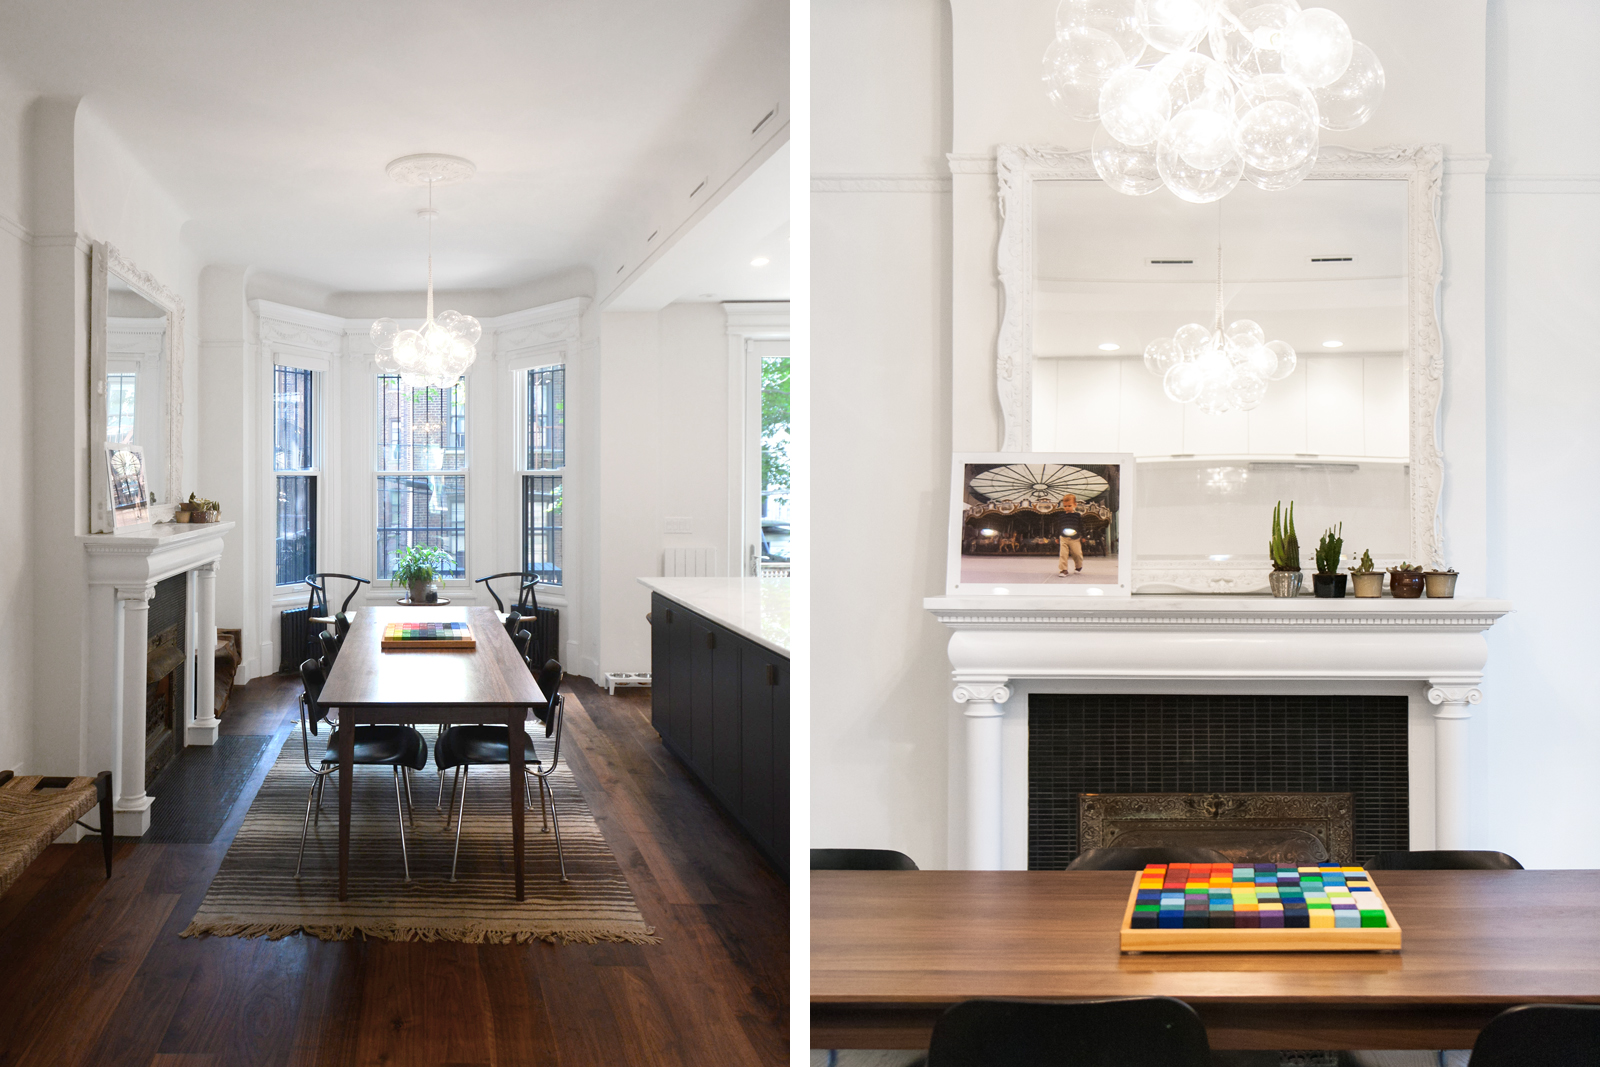 05-res4-resolution-4-architecture-modern-home-residential-renovation-13th-street-townhouse-interior-dining-fireplace.jpg